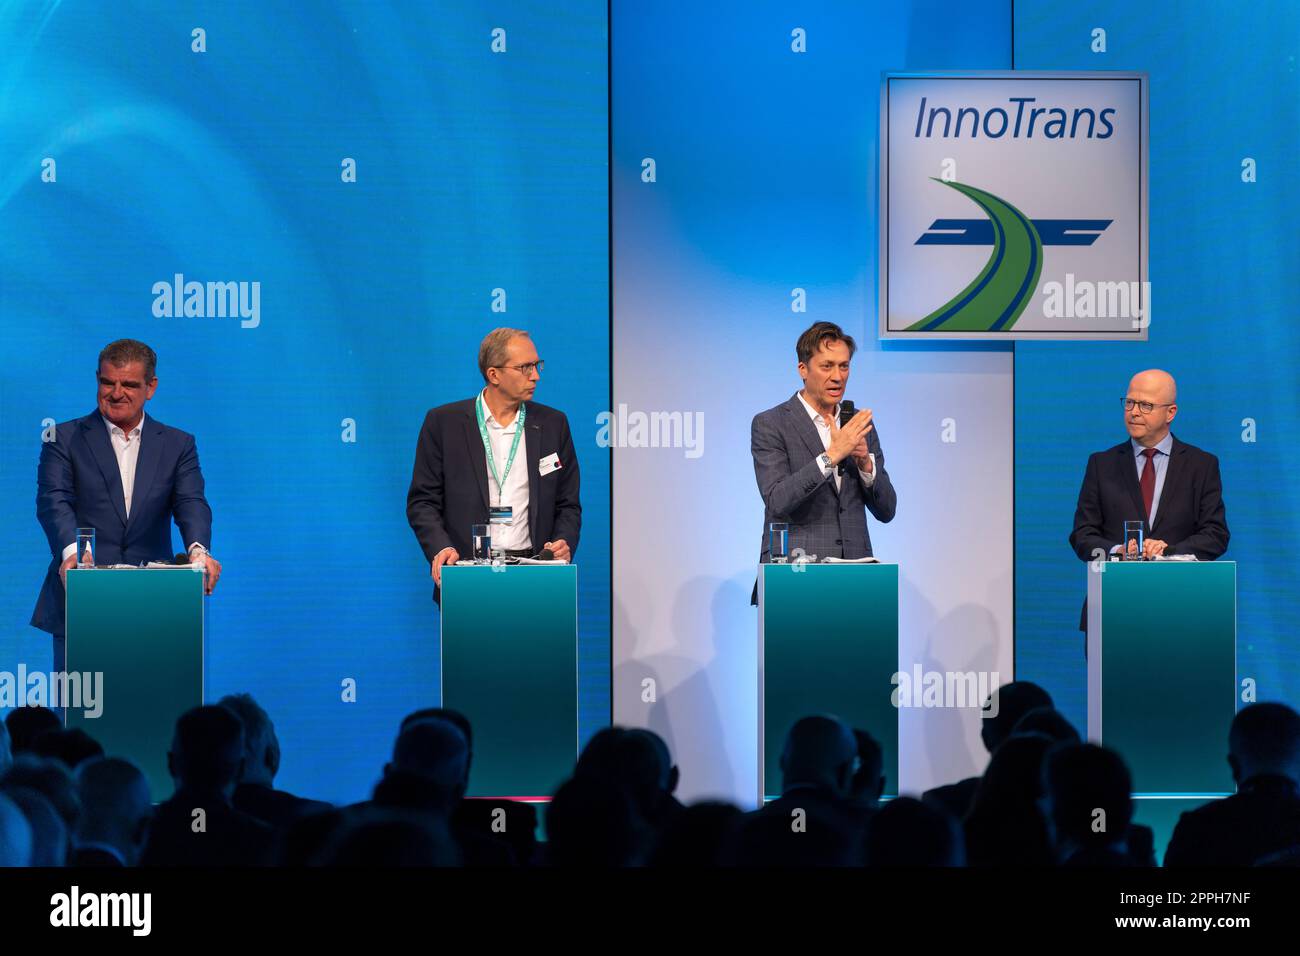 Innotrans 2022 Opening Ceremony, Panel Discussion, "The Future of Mobility in Times of Climate Change" Peter Spuhler, CEO Stadler Rail AG, Henri Poupart-Lafarge, Presidente Alstom, Transport SA, Michael Peter, CEO Siemens Mobility GmbH, Michael Theurer, P. Foto Stock